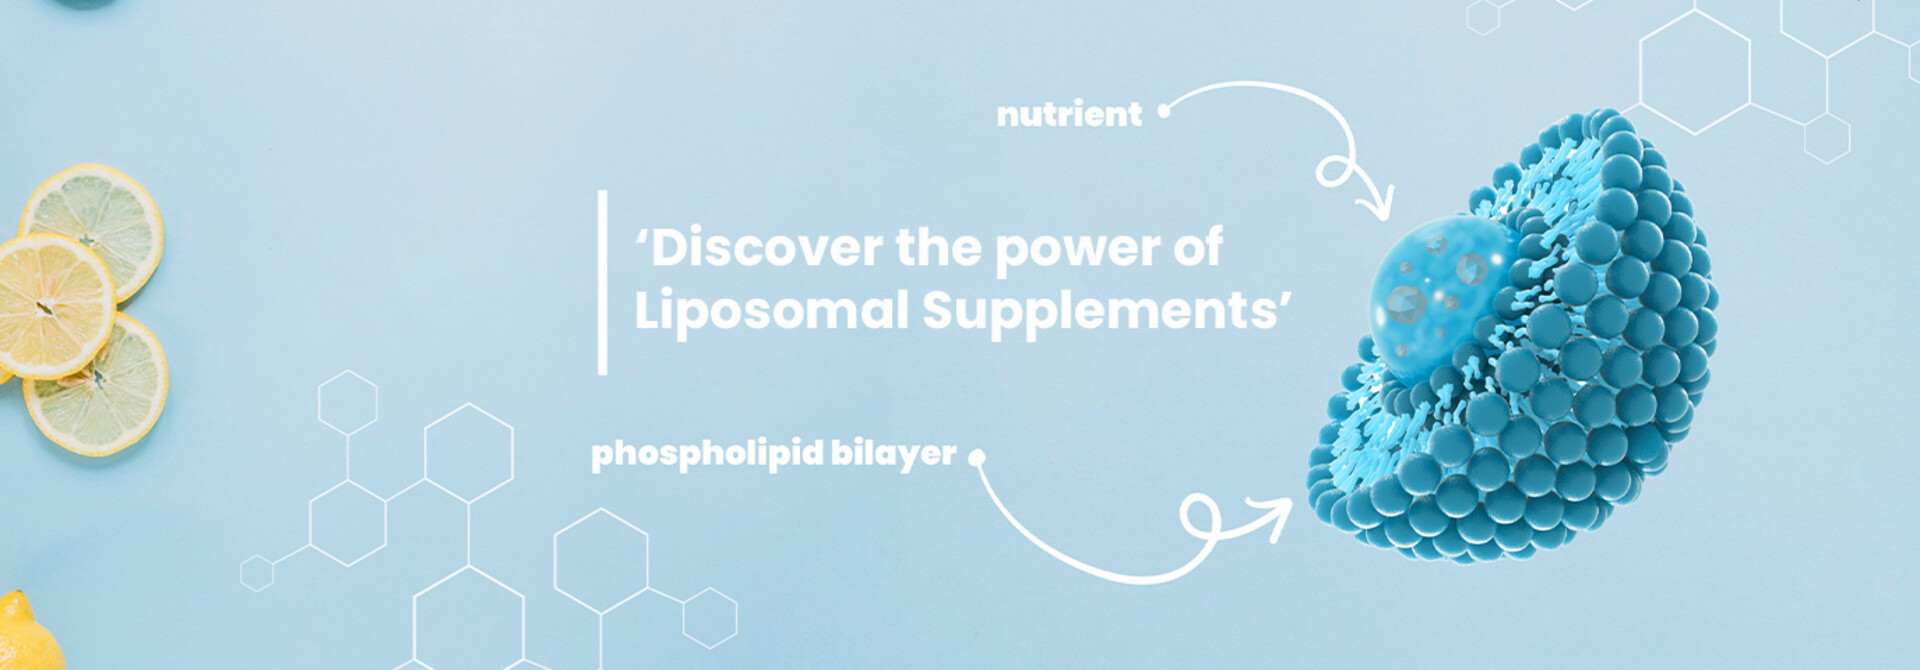 Discover the power of liposomal supplements: What are they and why are they better?